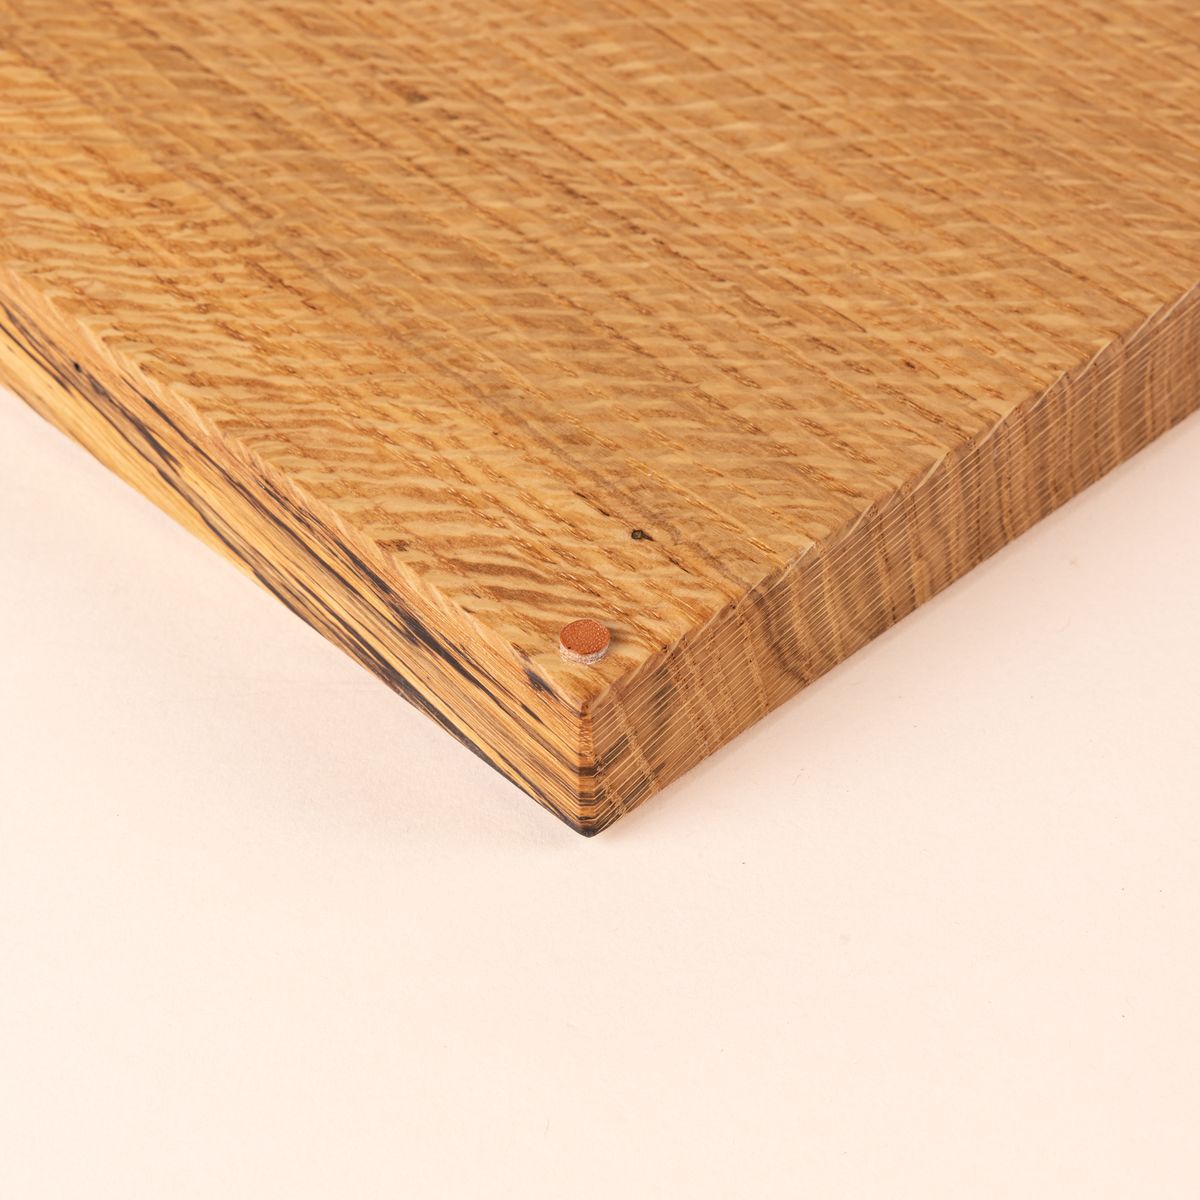 Close up of a corner of thick rectangular cutting board made of light-colored wood